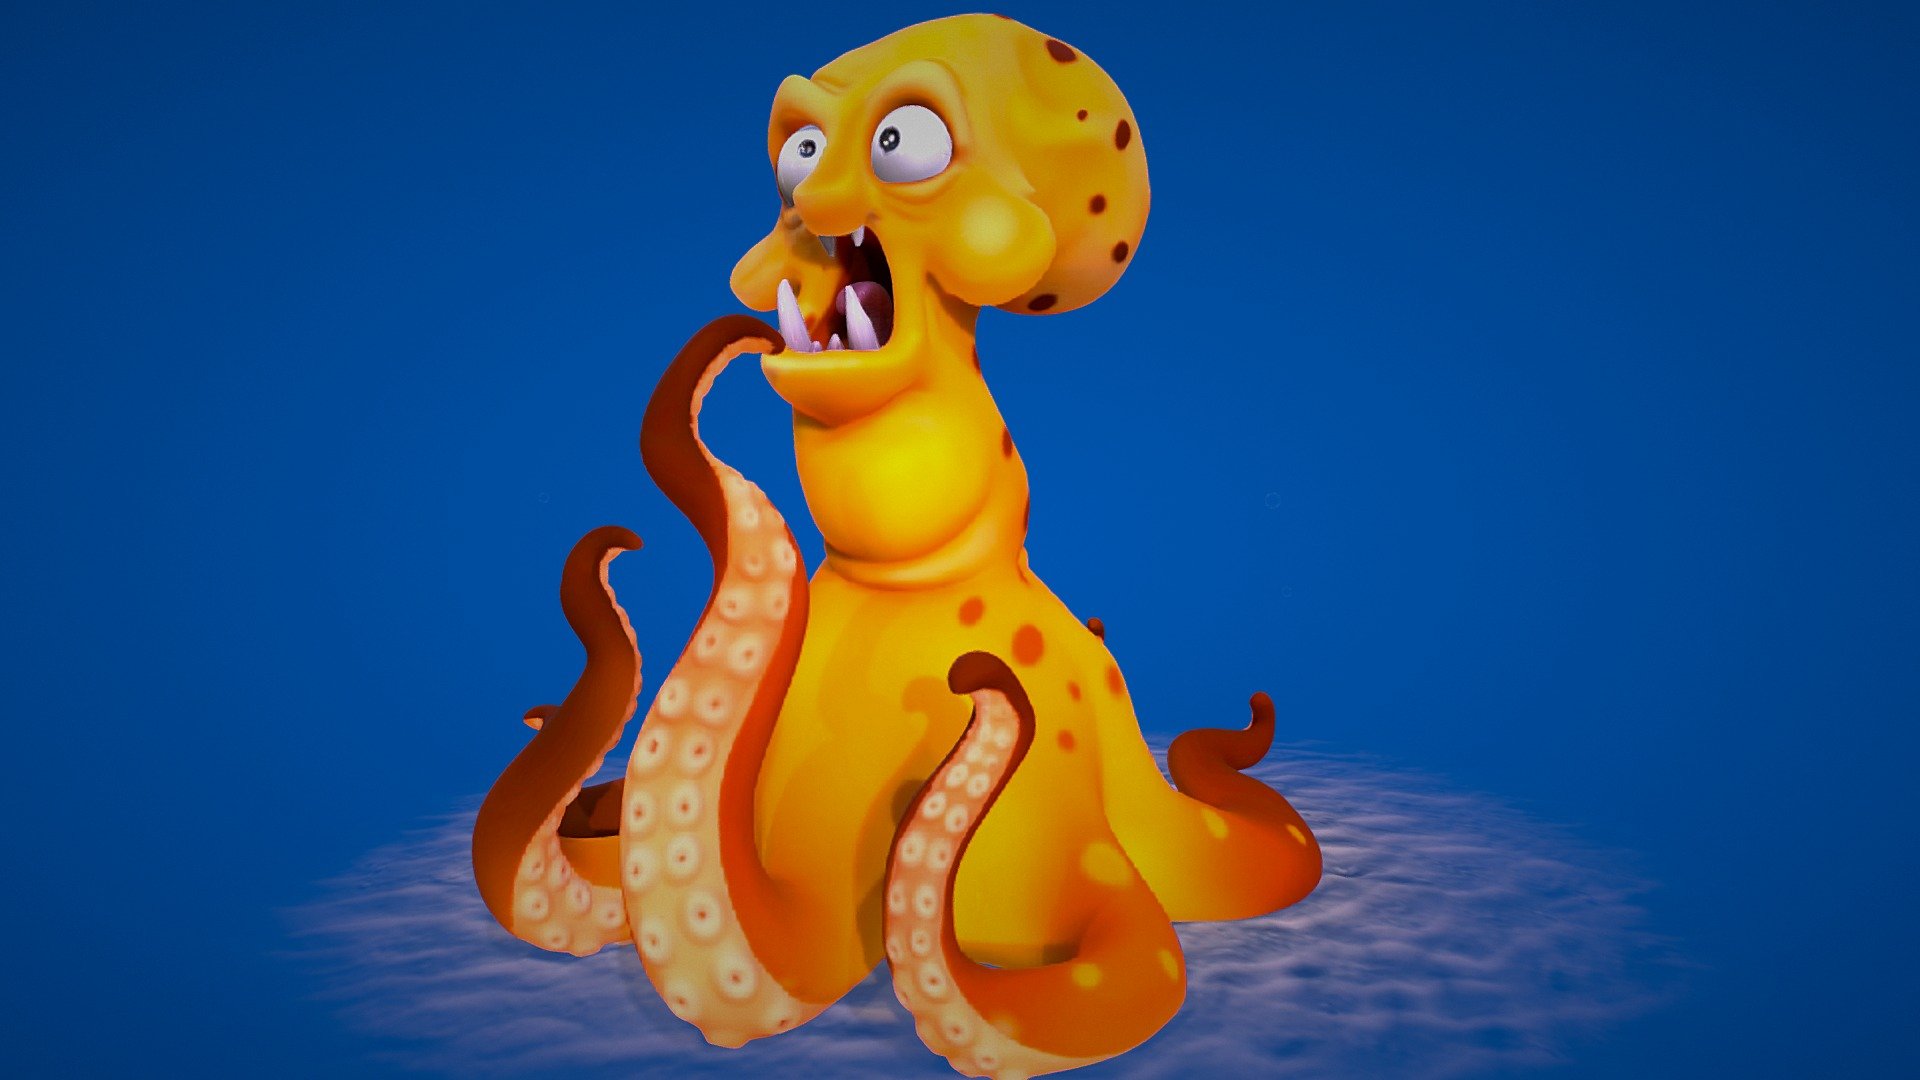 A Model from an illustration of an Octopus by Dave Neale - OCTOPUS - concept By Dave Neale - 3D model by gokcenyuksek 3d model